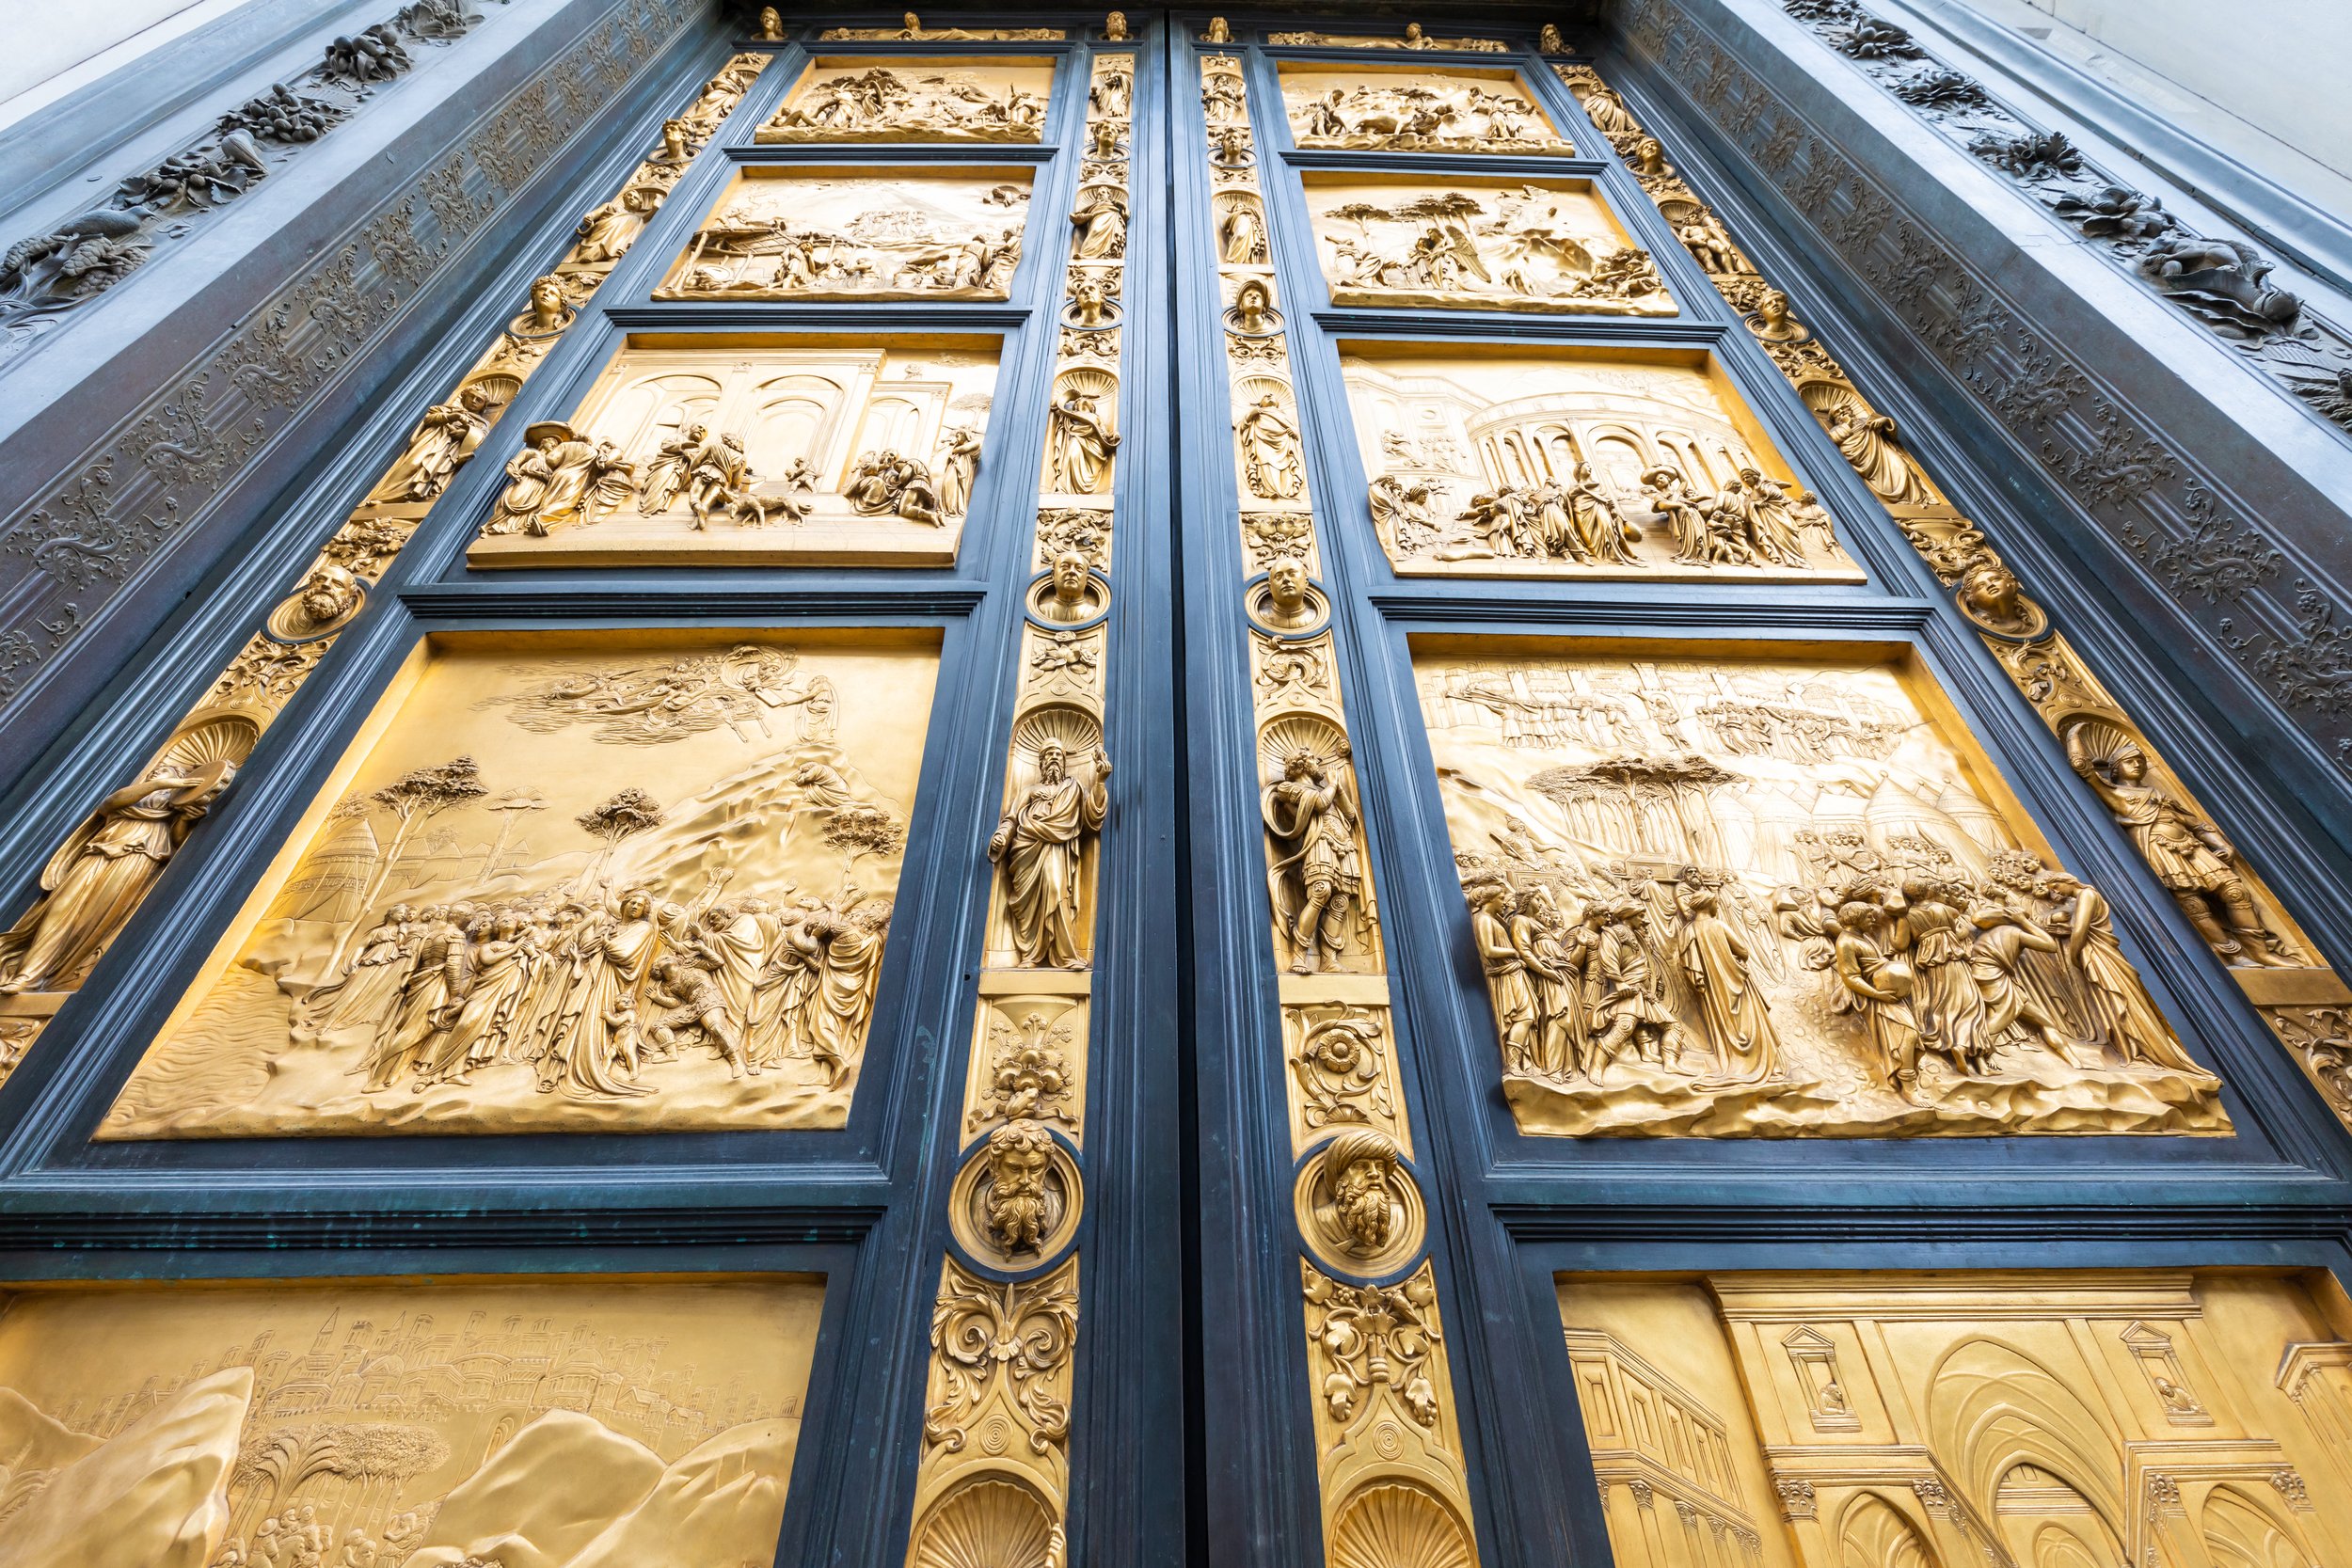 florence-gate-paradise-main-old-door-baptistry-florence-battistero-di-san-giovanni-located-front-cathedral-santa-maria-del-fiore.jpg